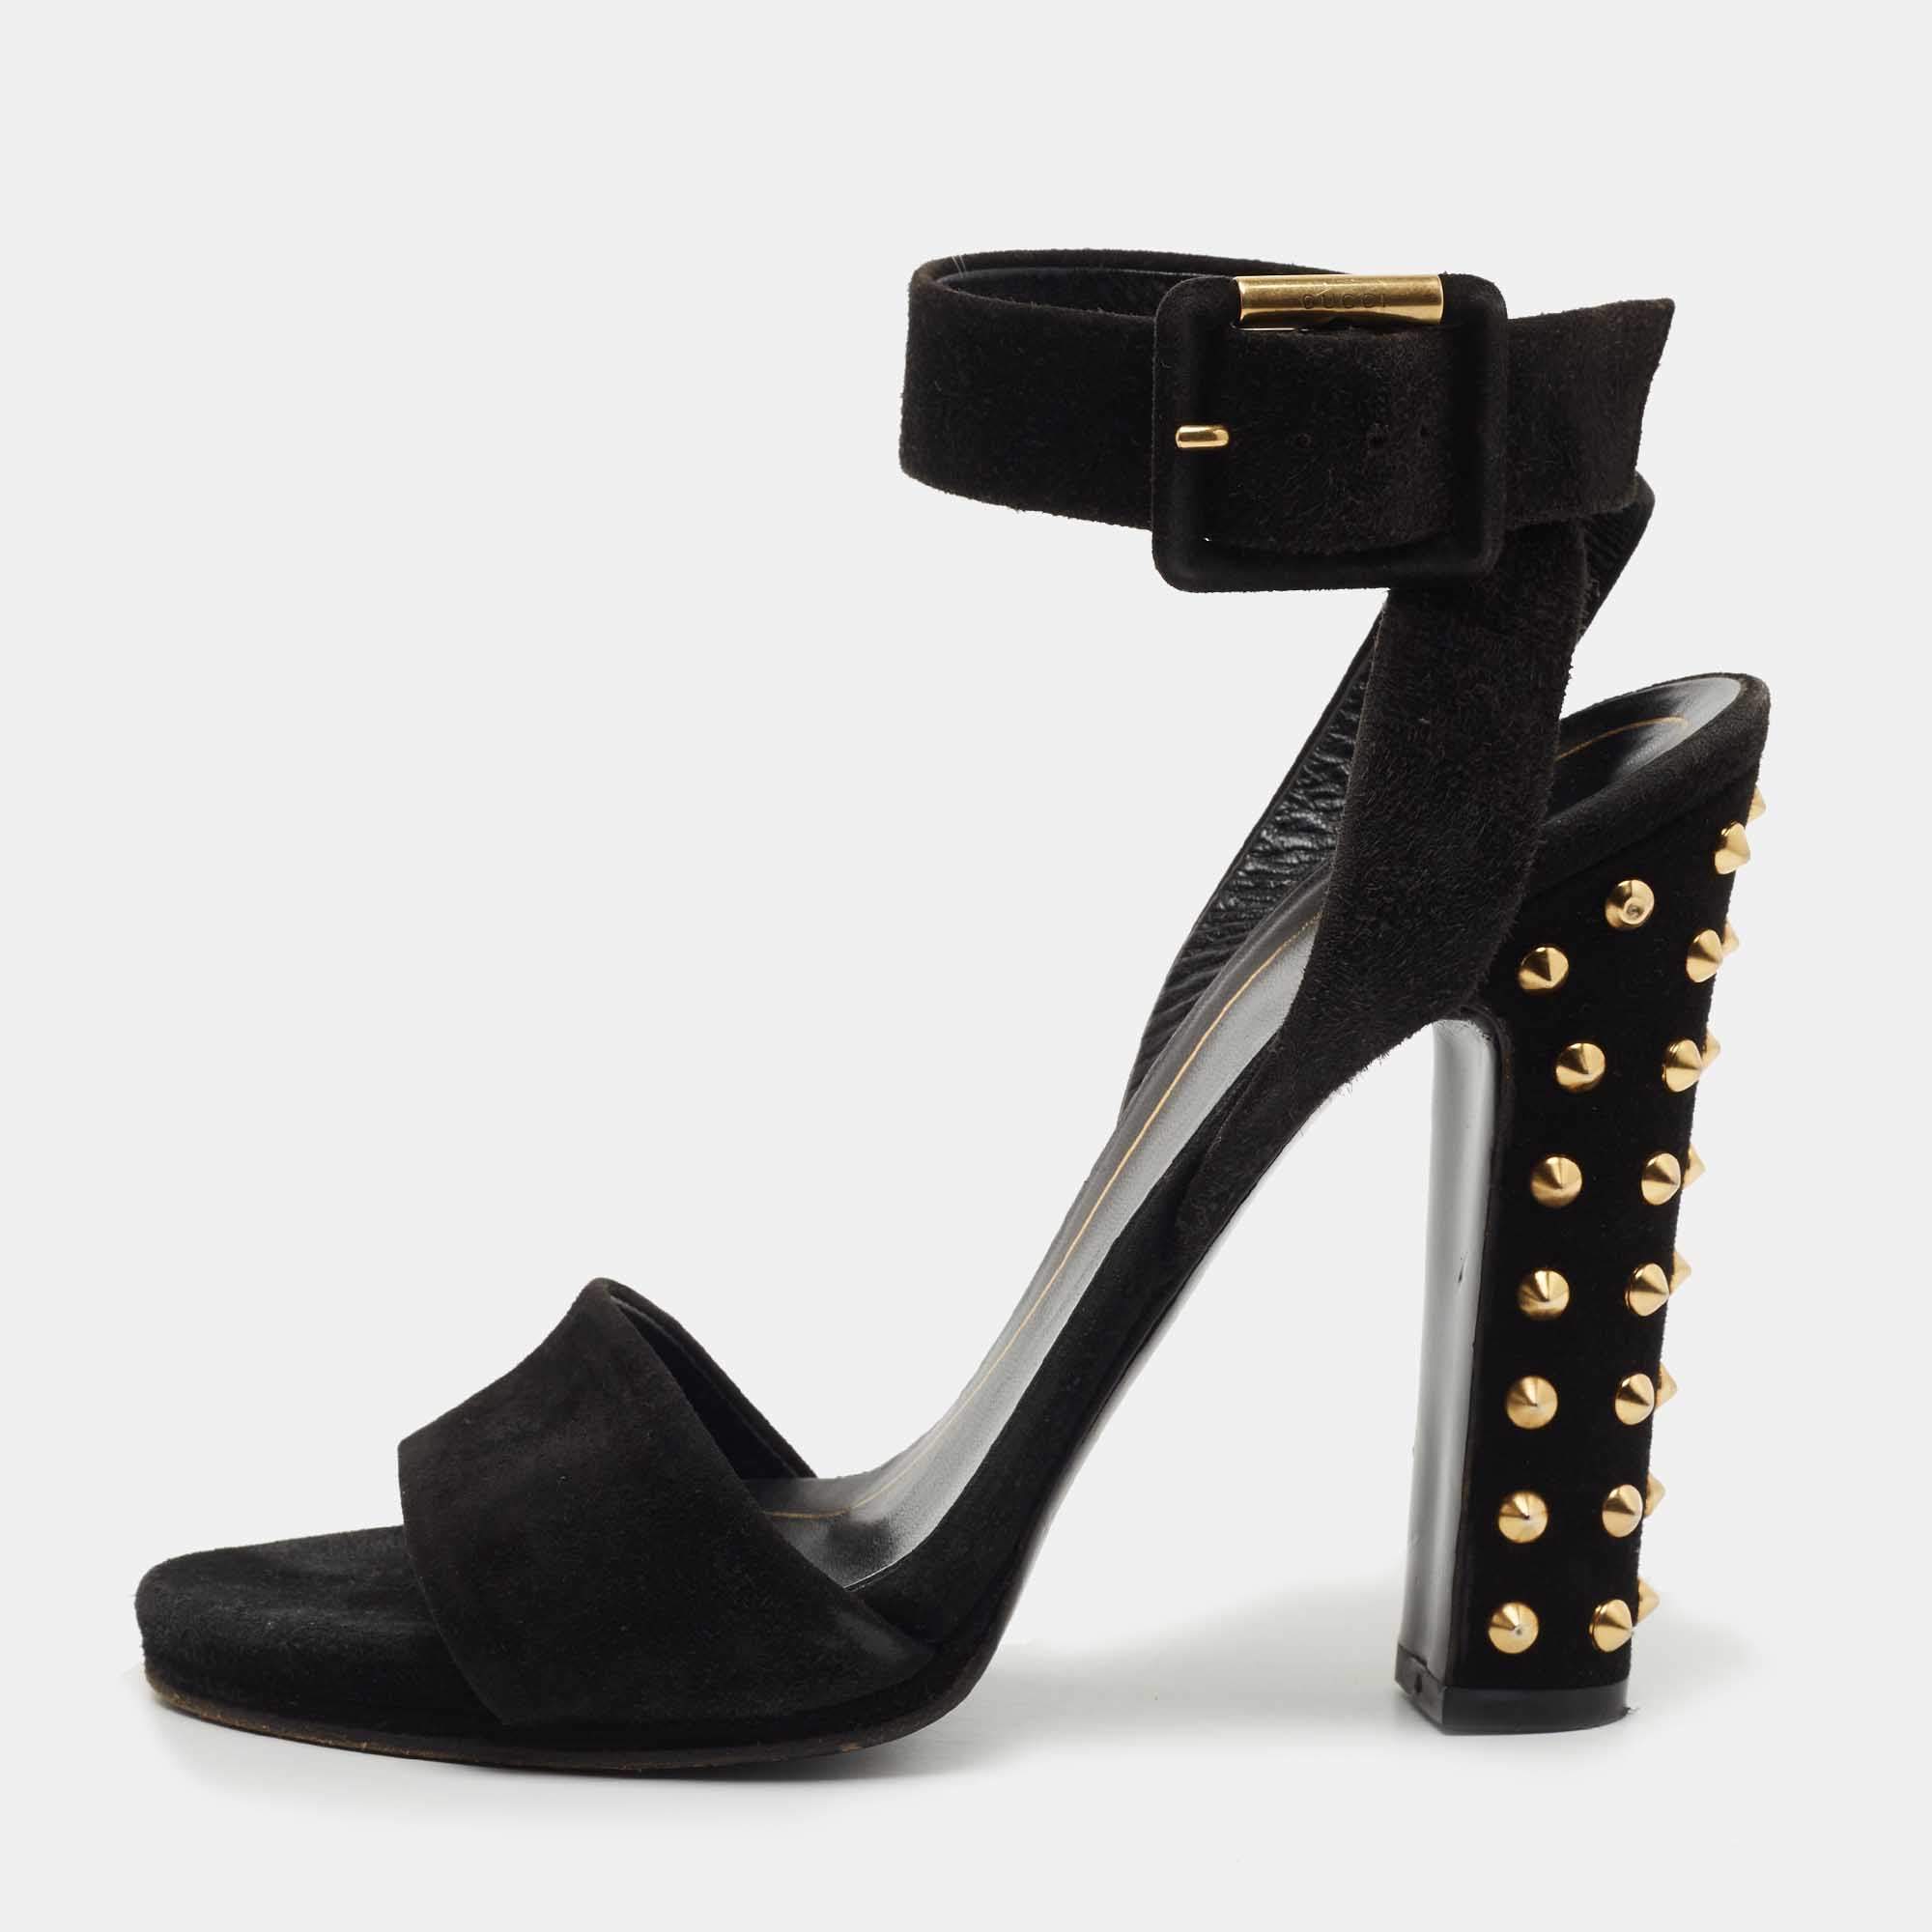 Gucci Black Suede Studded Ankle Wrap Sandals Size 37